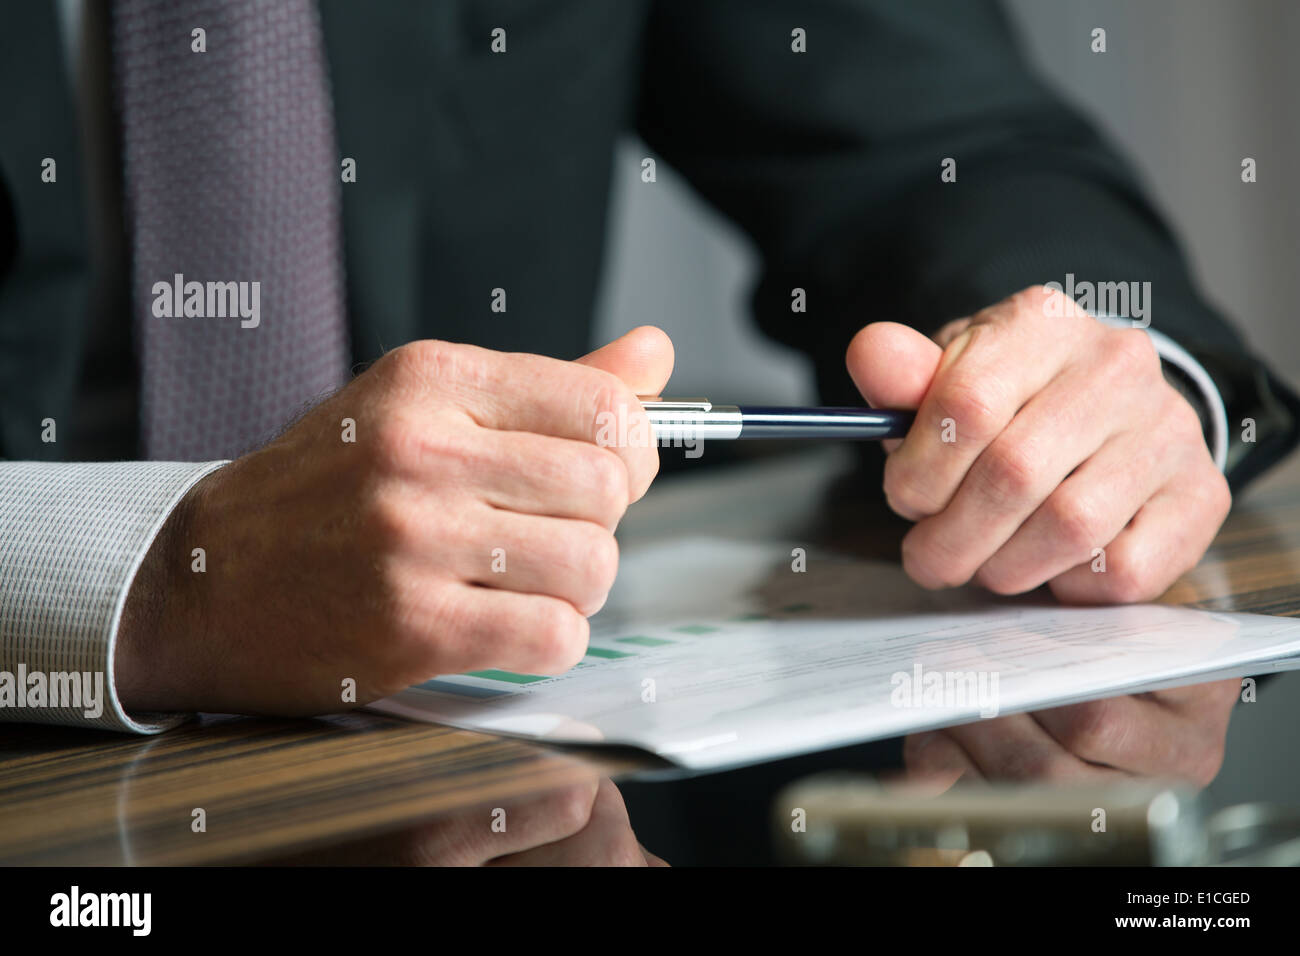 Man's hands holding a black pen in both arms in a thinking gesture during a meeting or negotiation Stock Photo